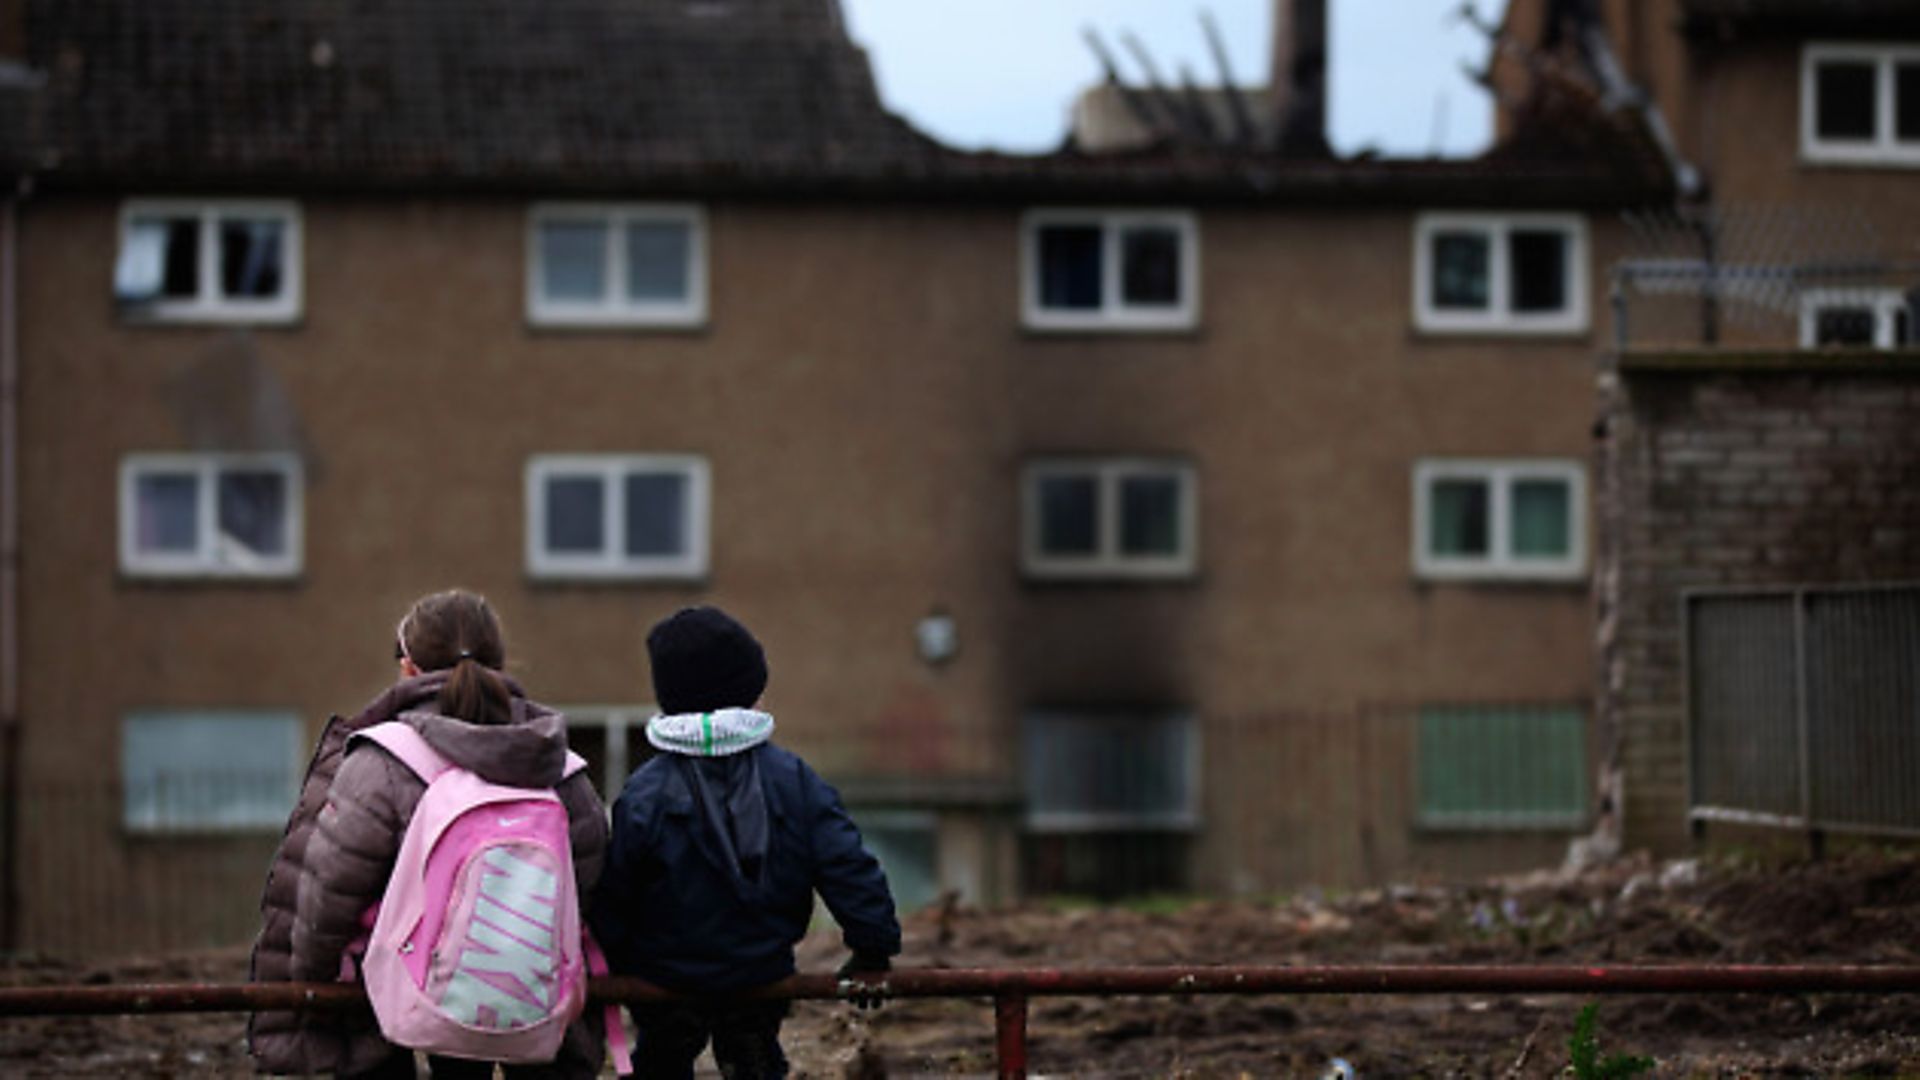 Children make their way home from school in the Easterhouse housing estate in Glasgow, 2010. - Credit: Getty Images